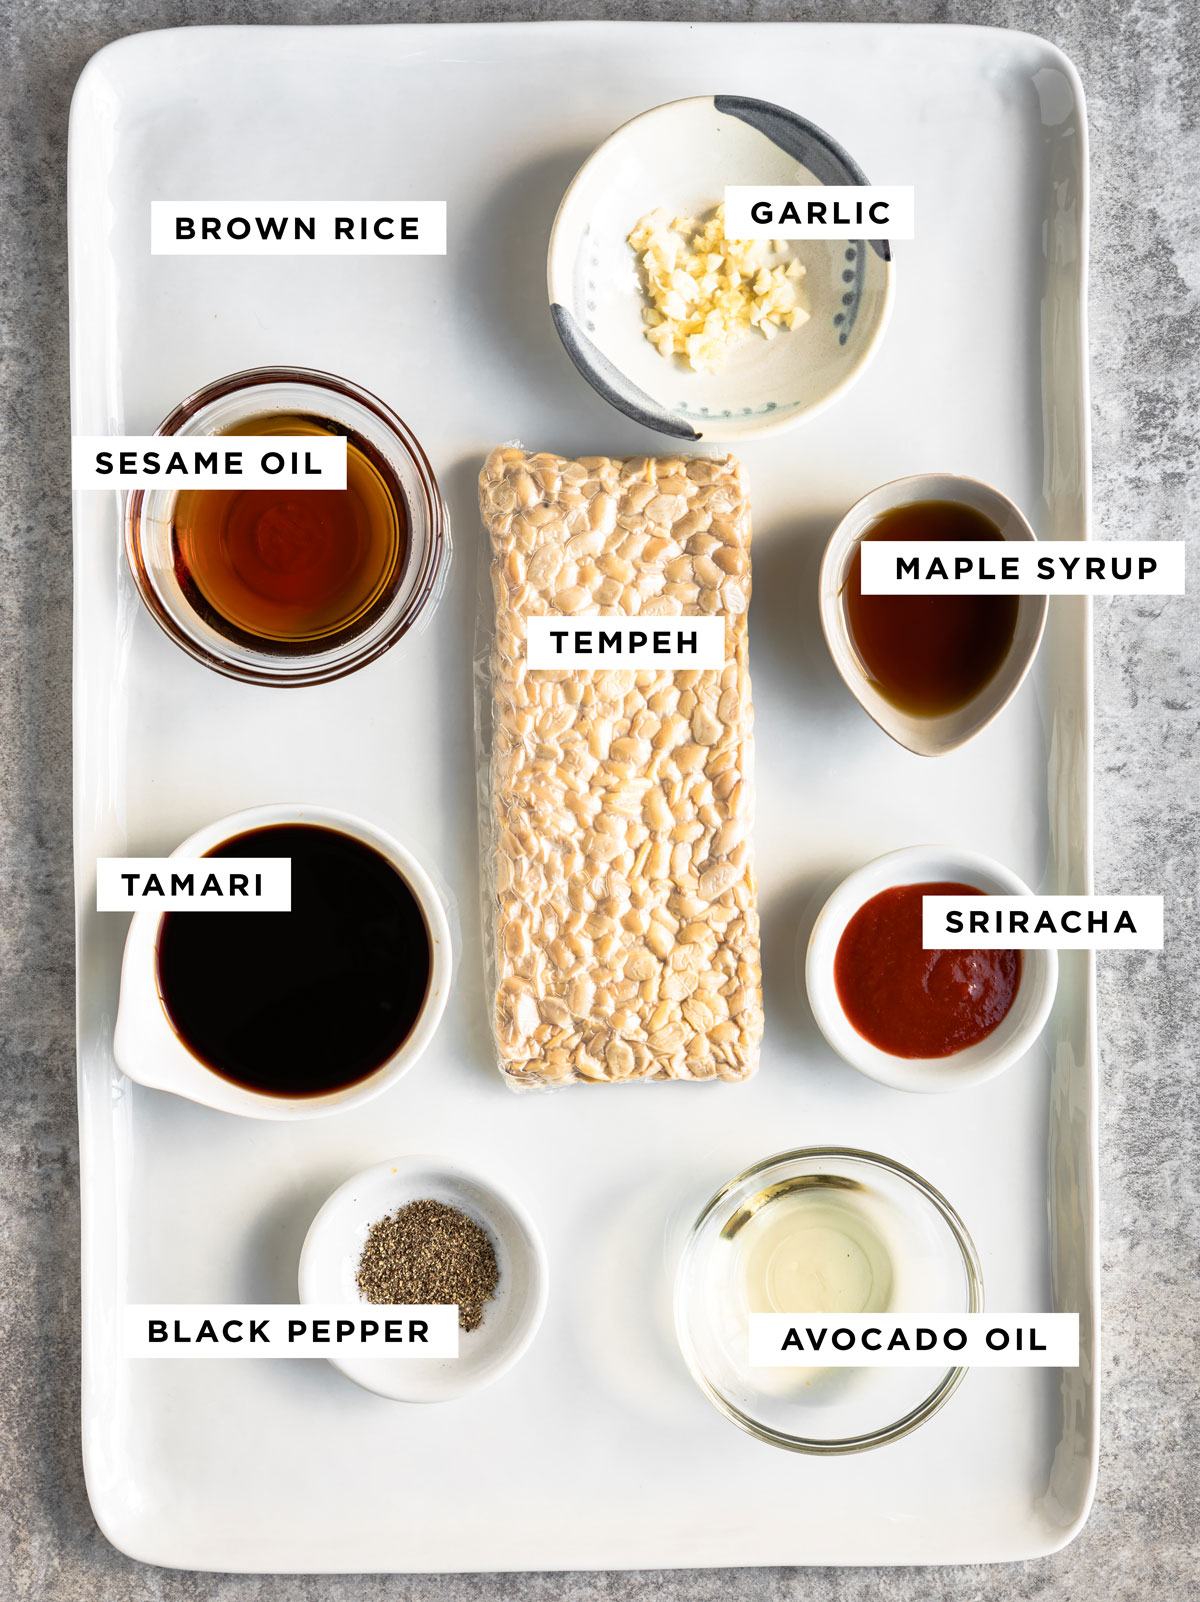 labeled ingredients for a tempeh bowl including brown rice, garlic, sesame oil, maple syrup, tempeh, tamari, sriracha, black pepper and avocado oil.